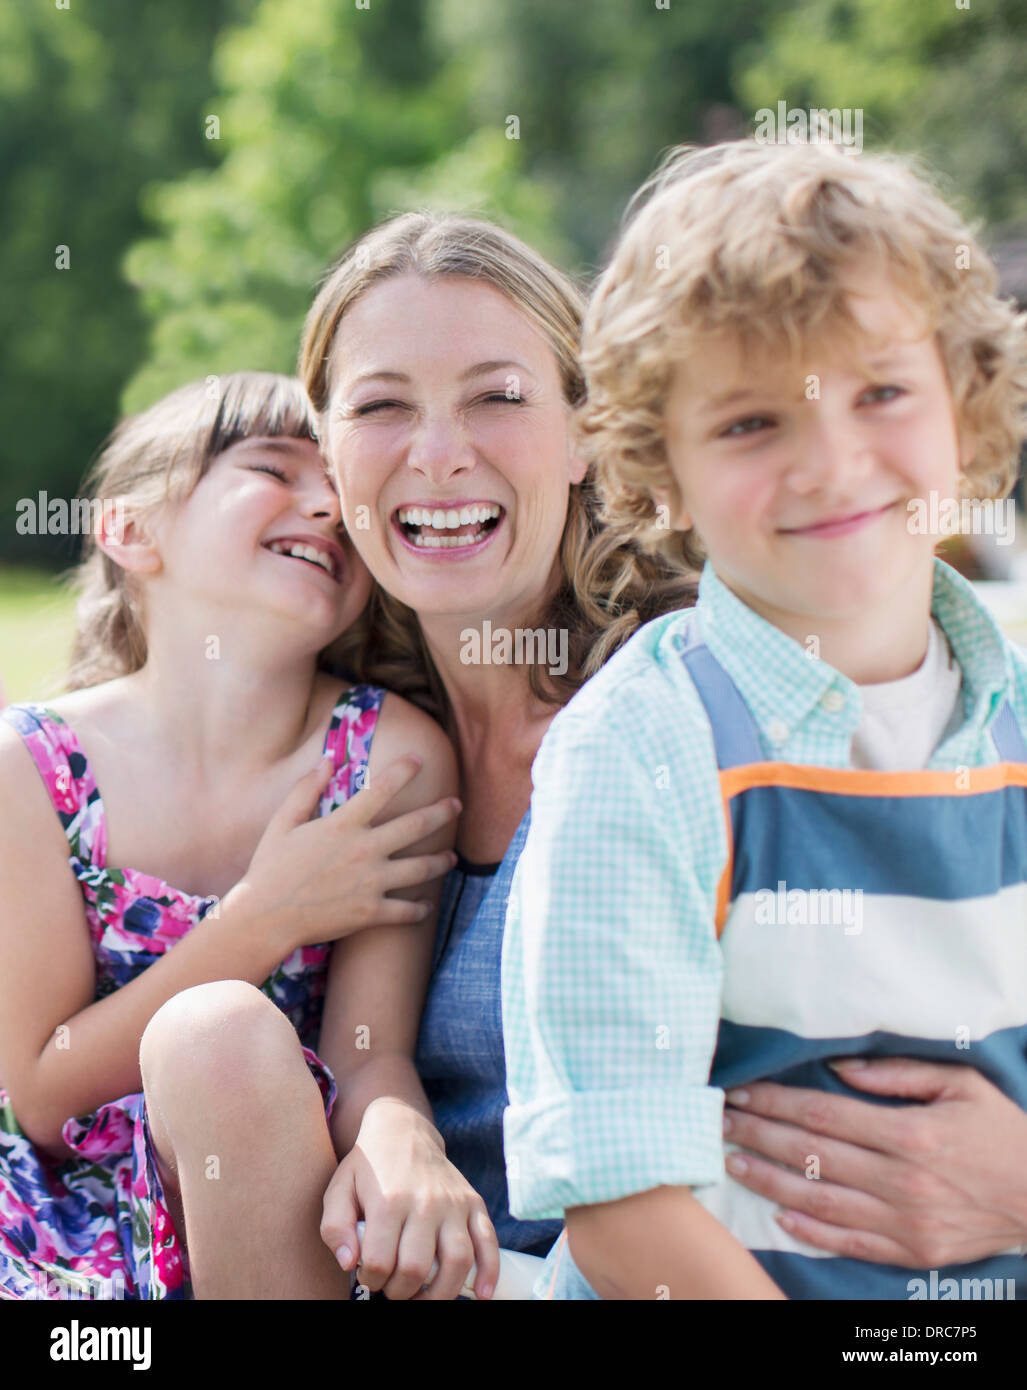 Mother and children smiling outdoors Stock Photo